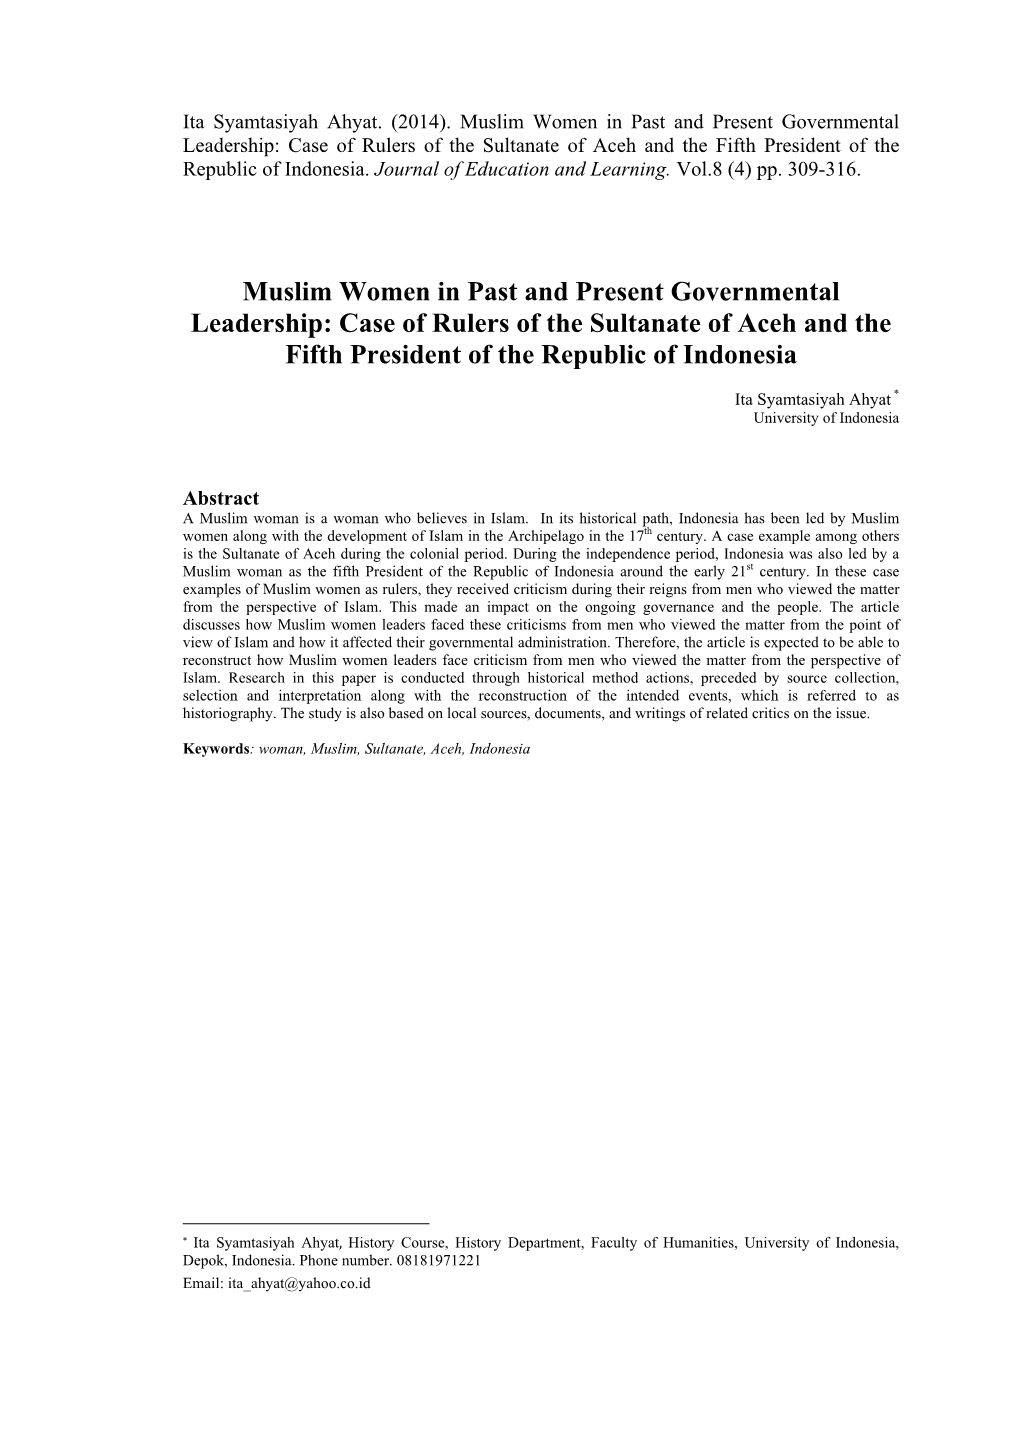 Muslim Women in Past and Present Governmental Leadership: Case of Rulers of the Sultanate of Aceh and the Fifth President of the Republic of Indonesia